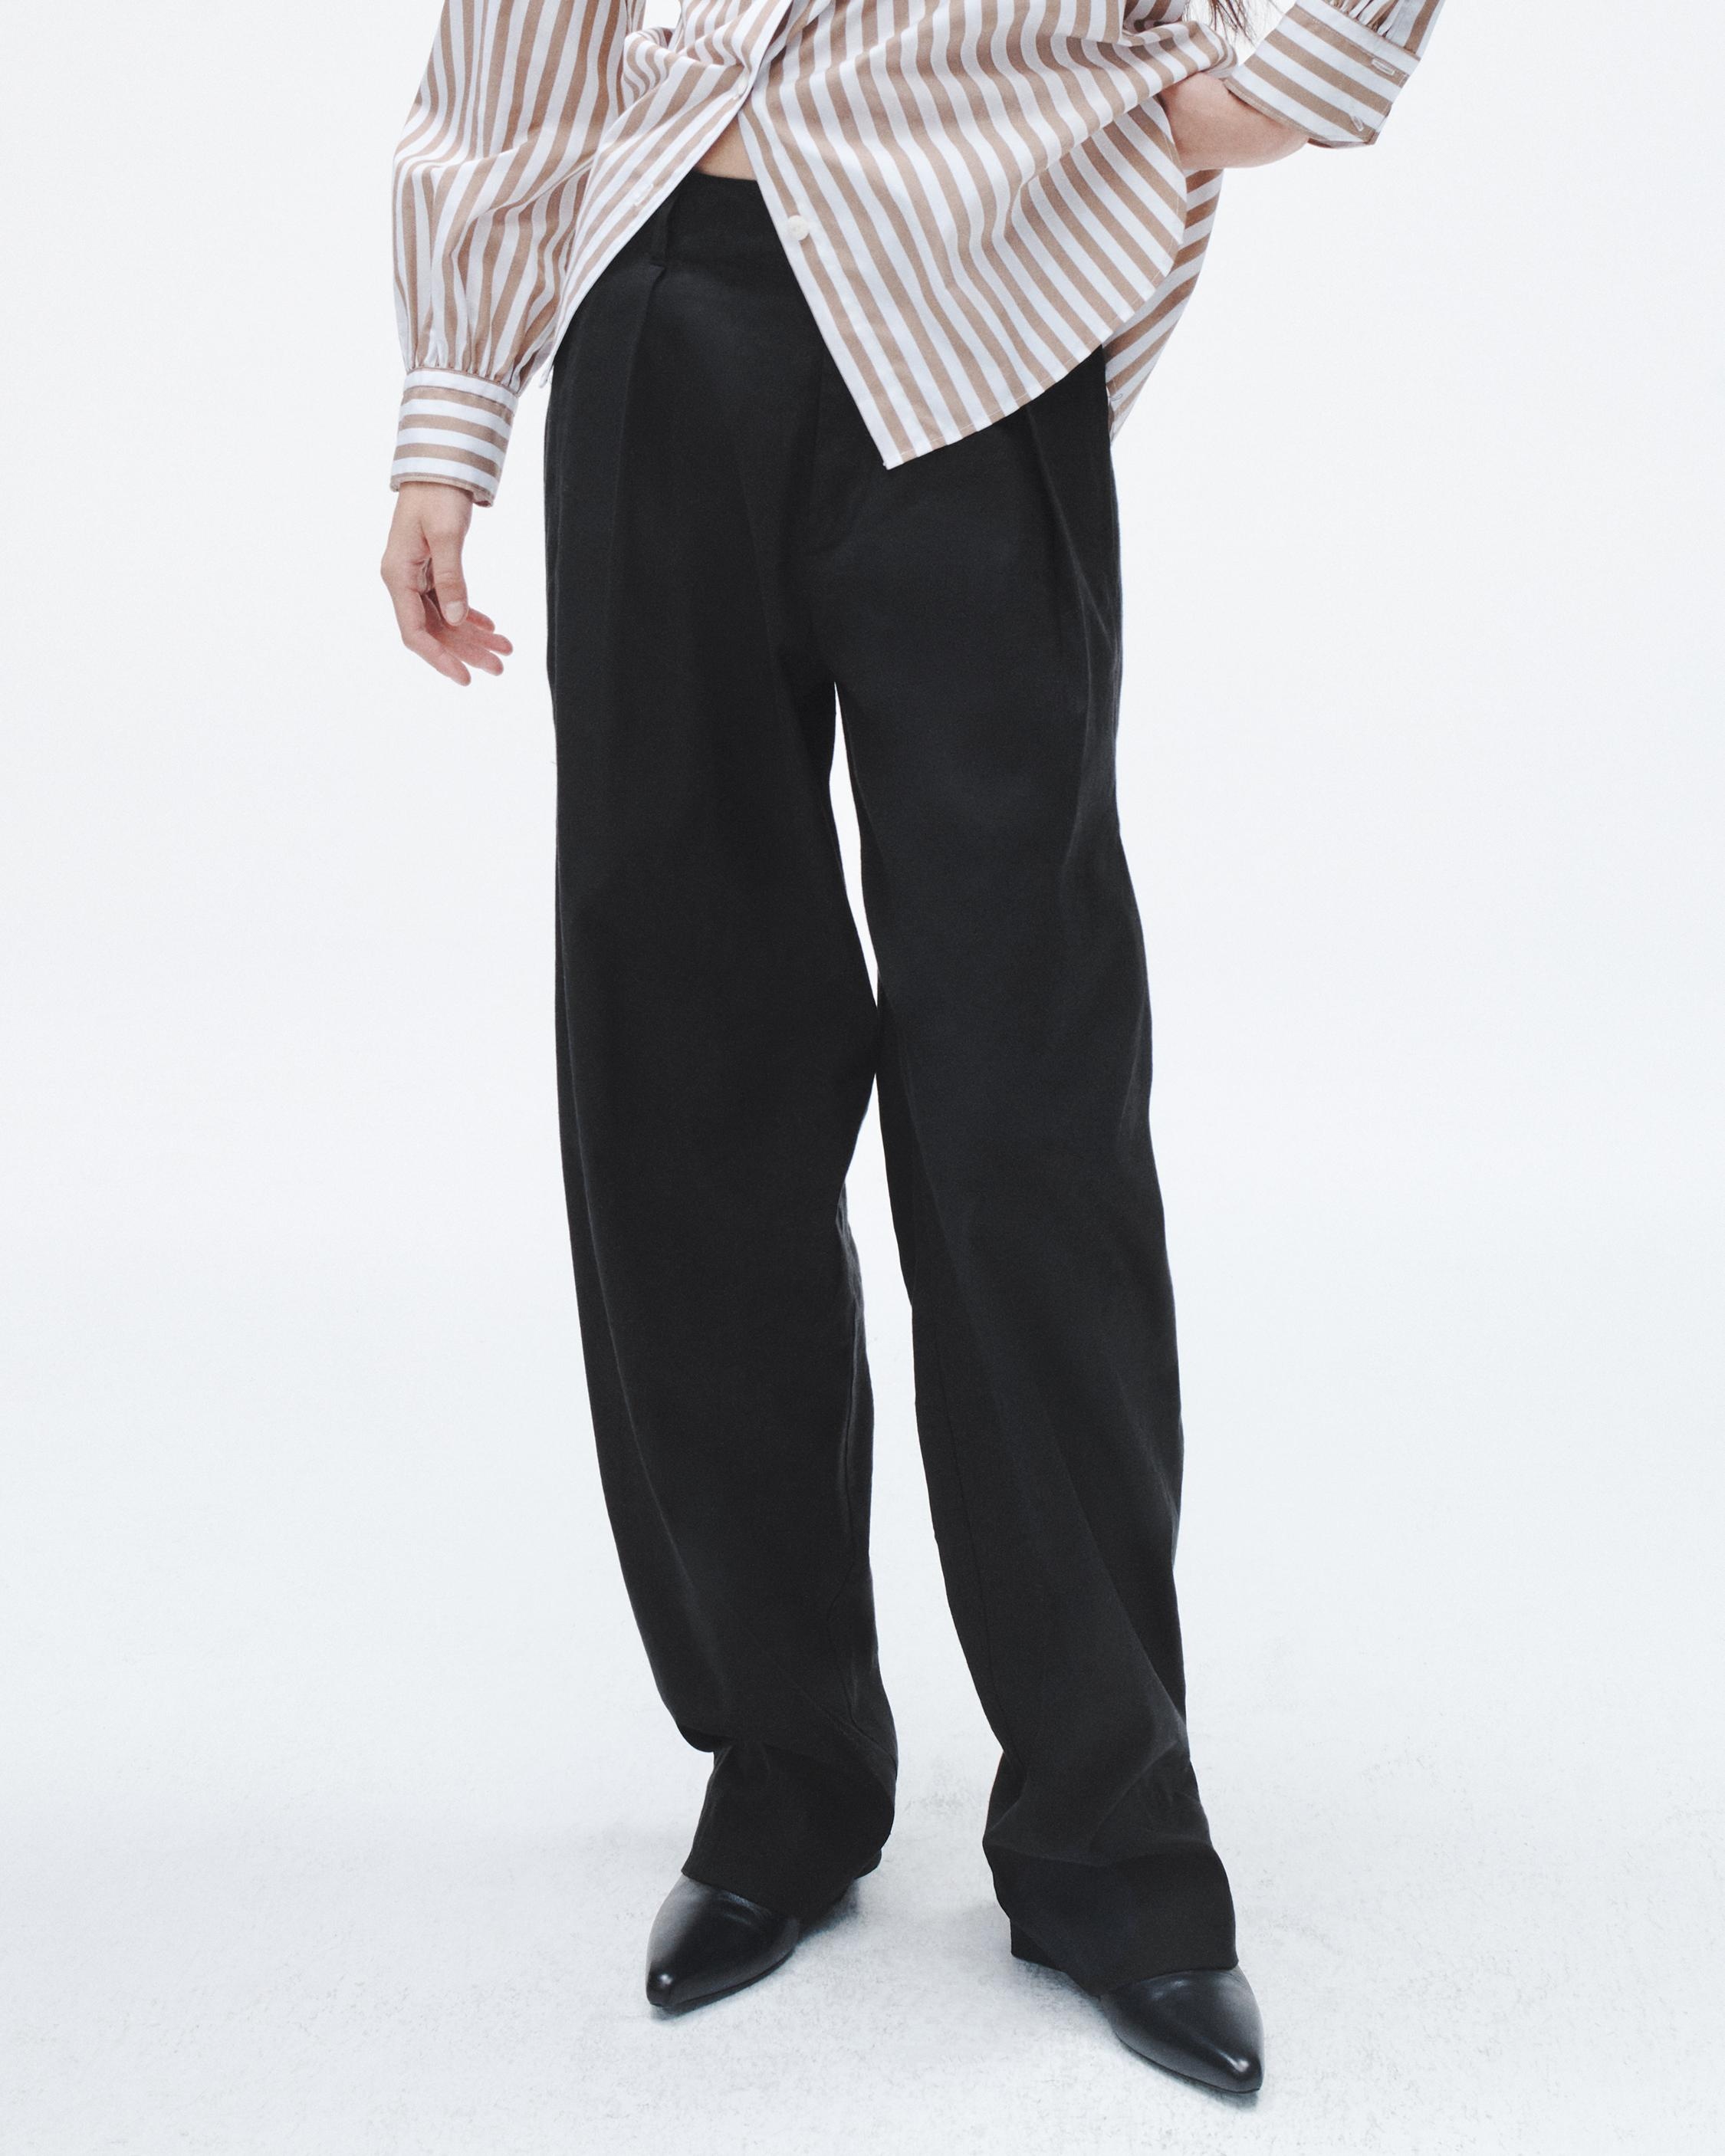 Donovan Linen Pant
Relaxed Fit - 5